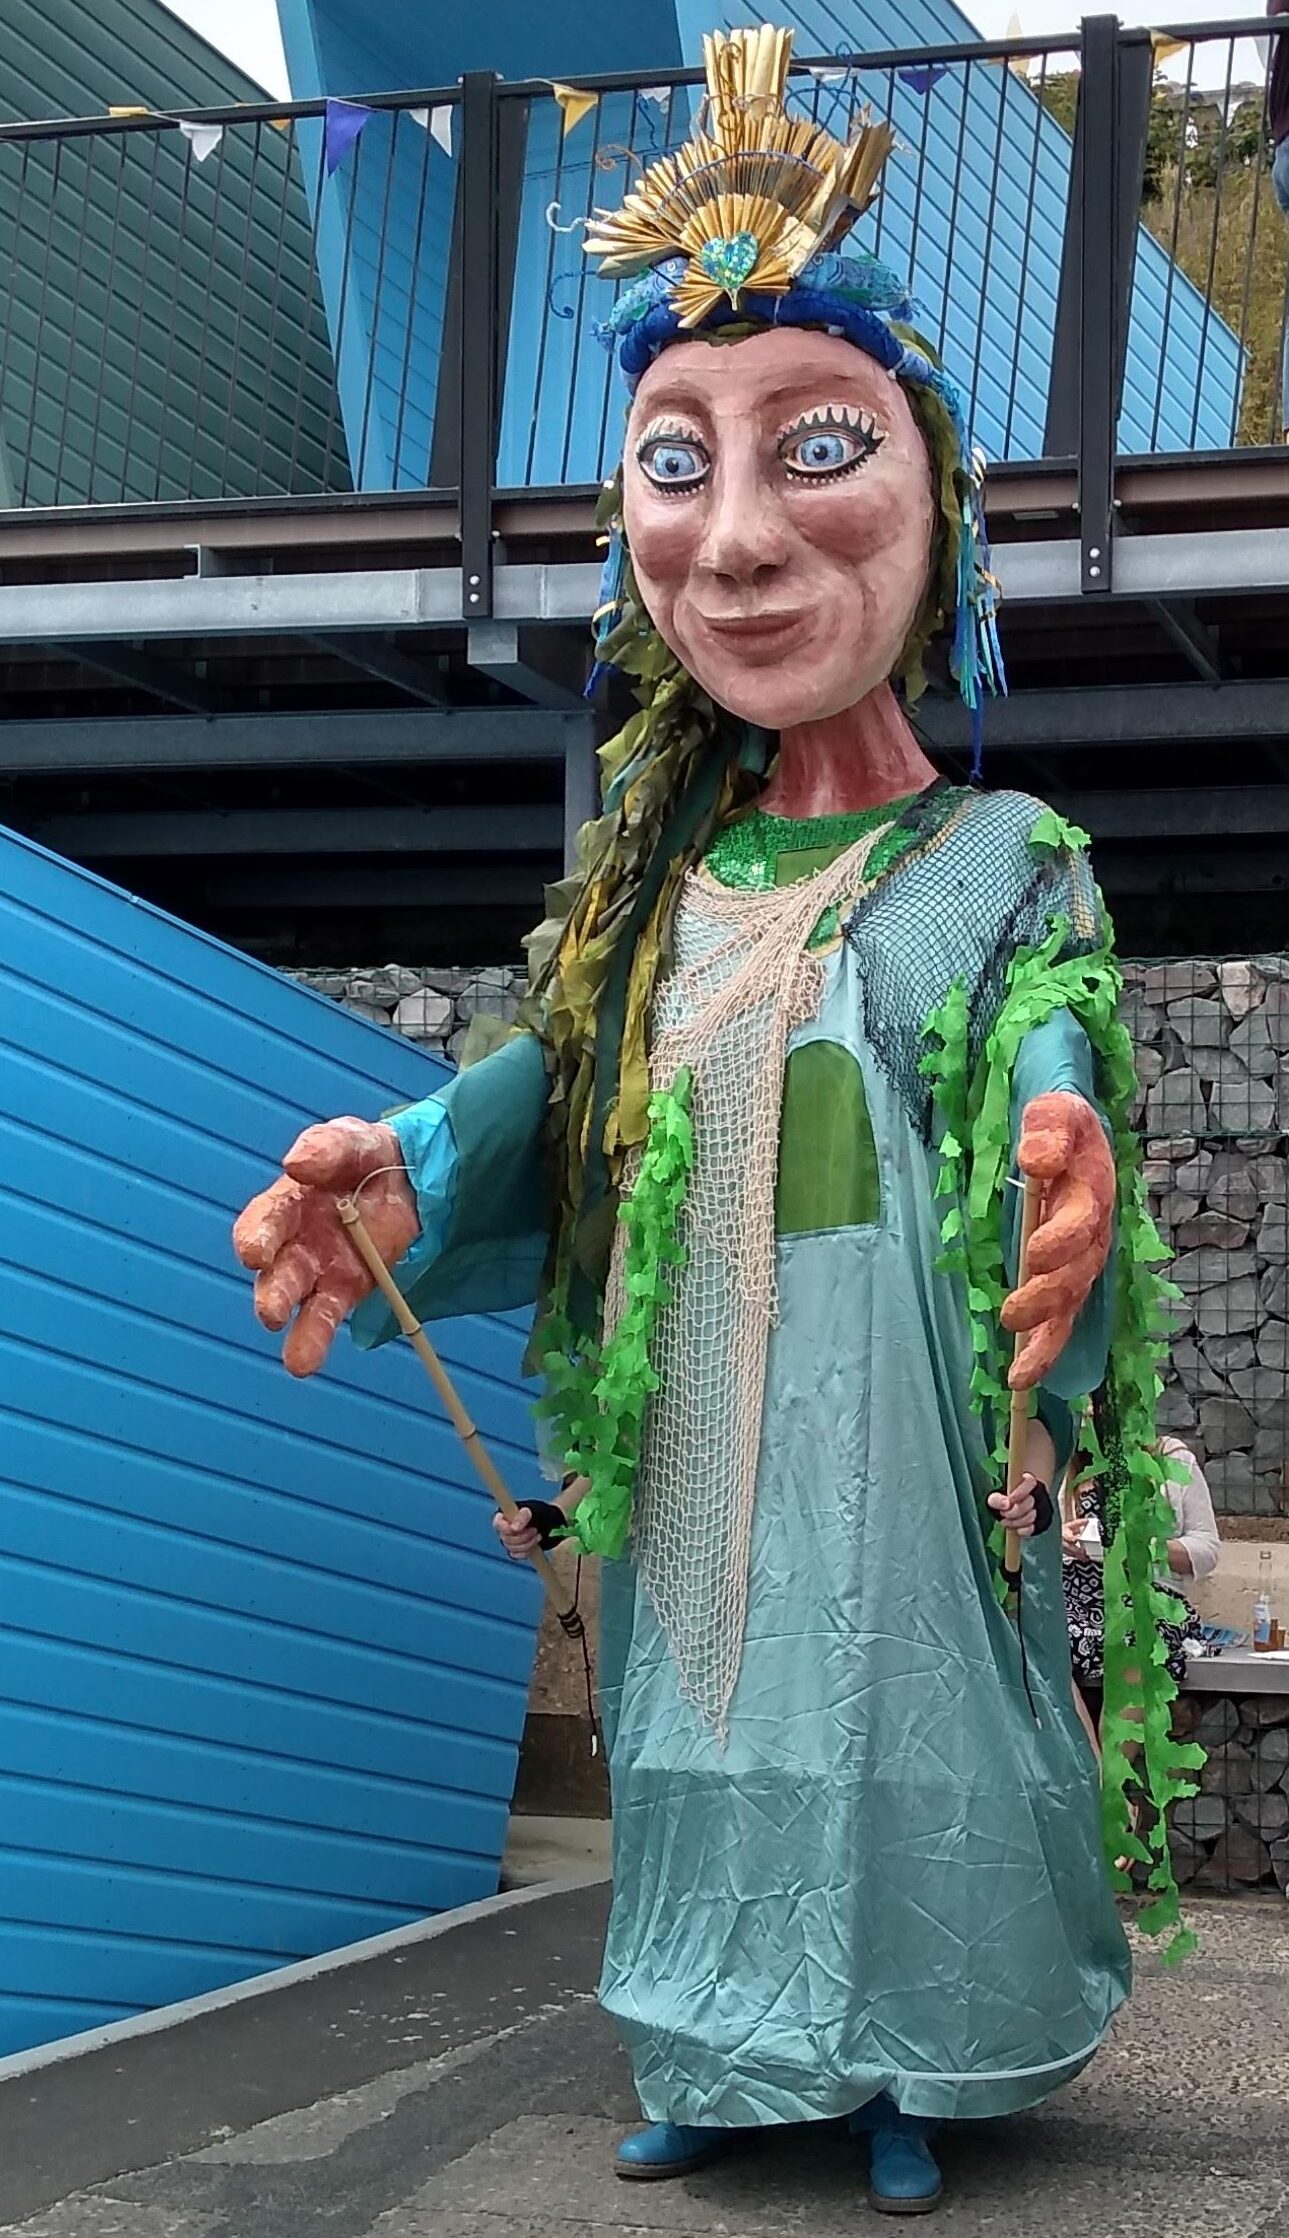 A huge puppet, powered by a person inside, using long poles to manoeuvre the large hands. The figure is dressed in long flowing net gown, drapes of green fabric resembling seaweed and has the rising sun as a crown